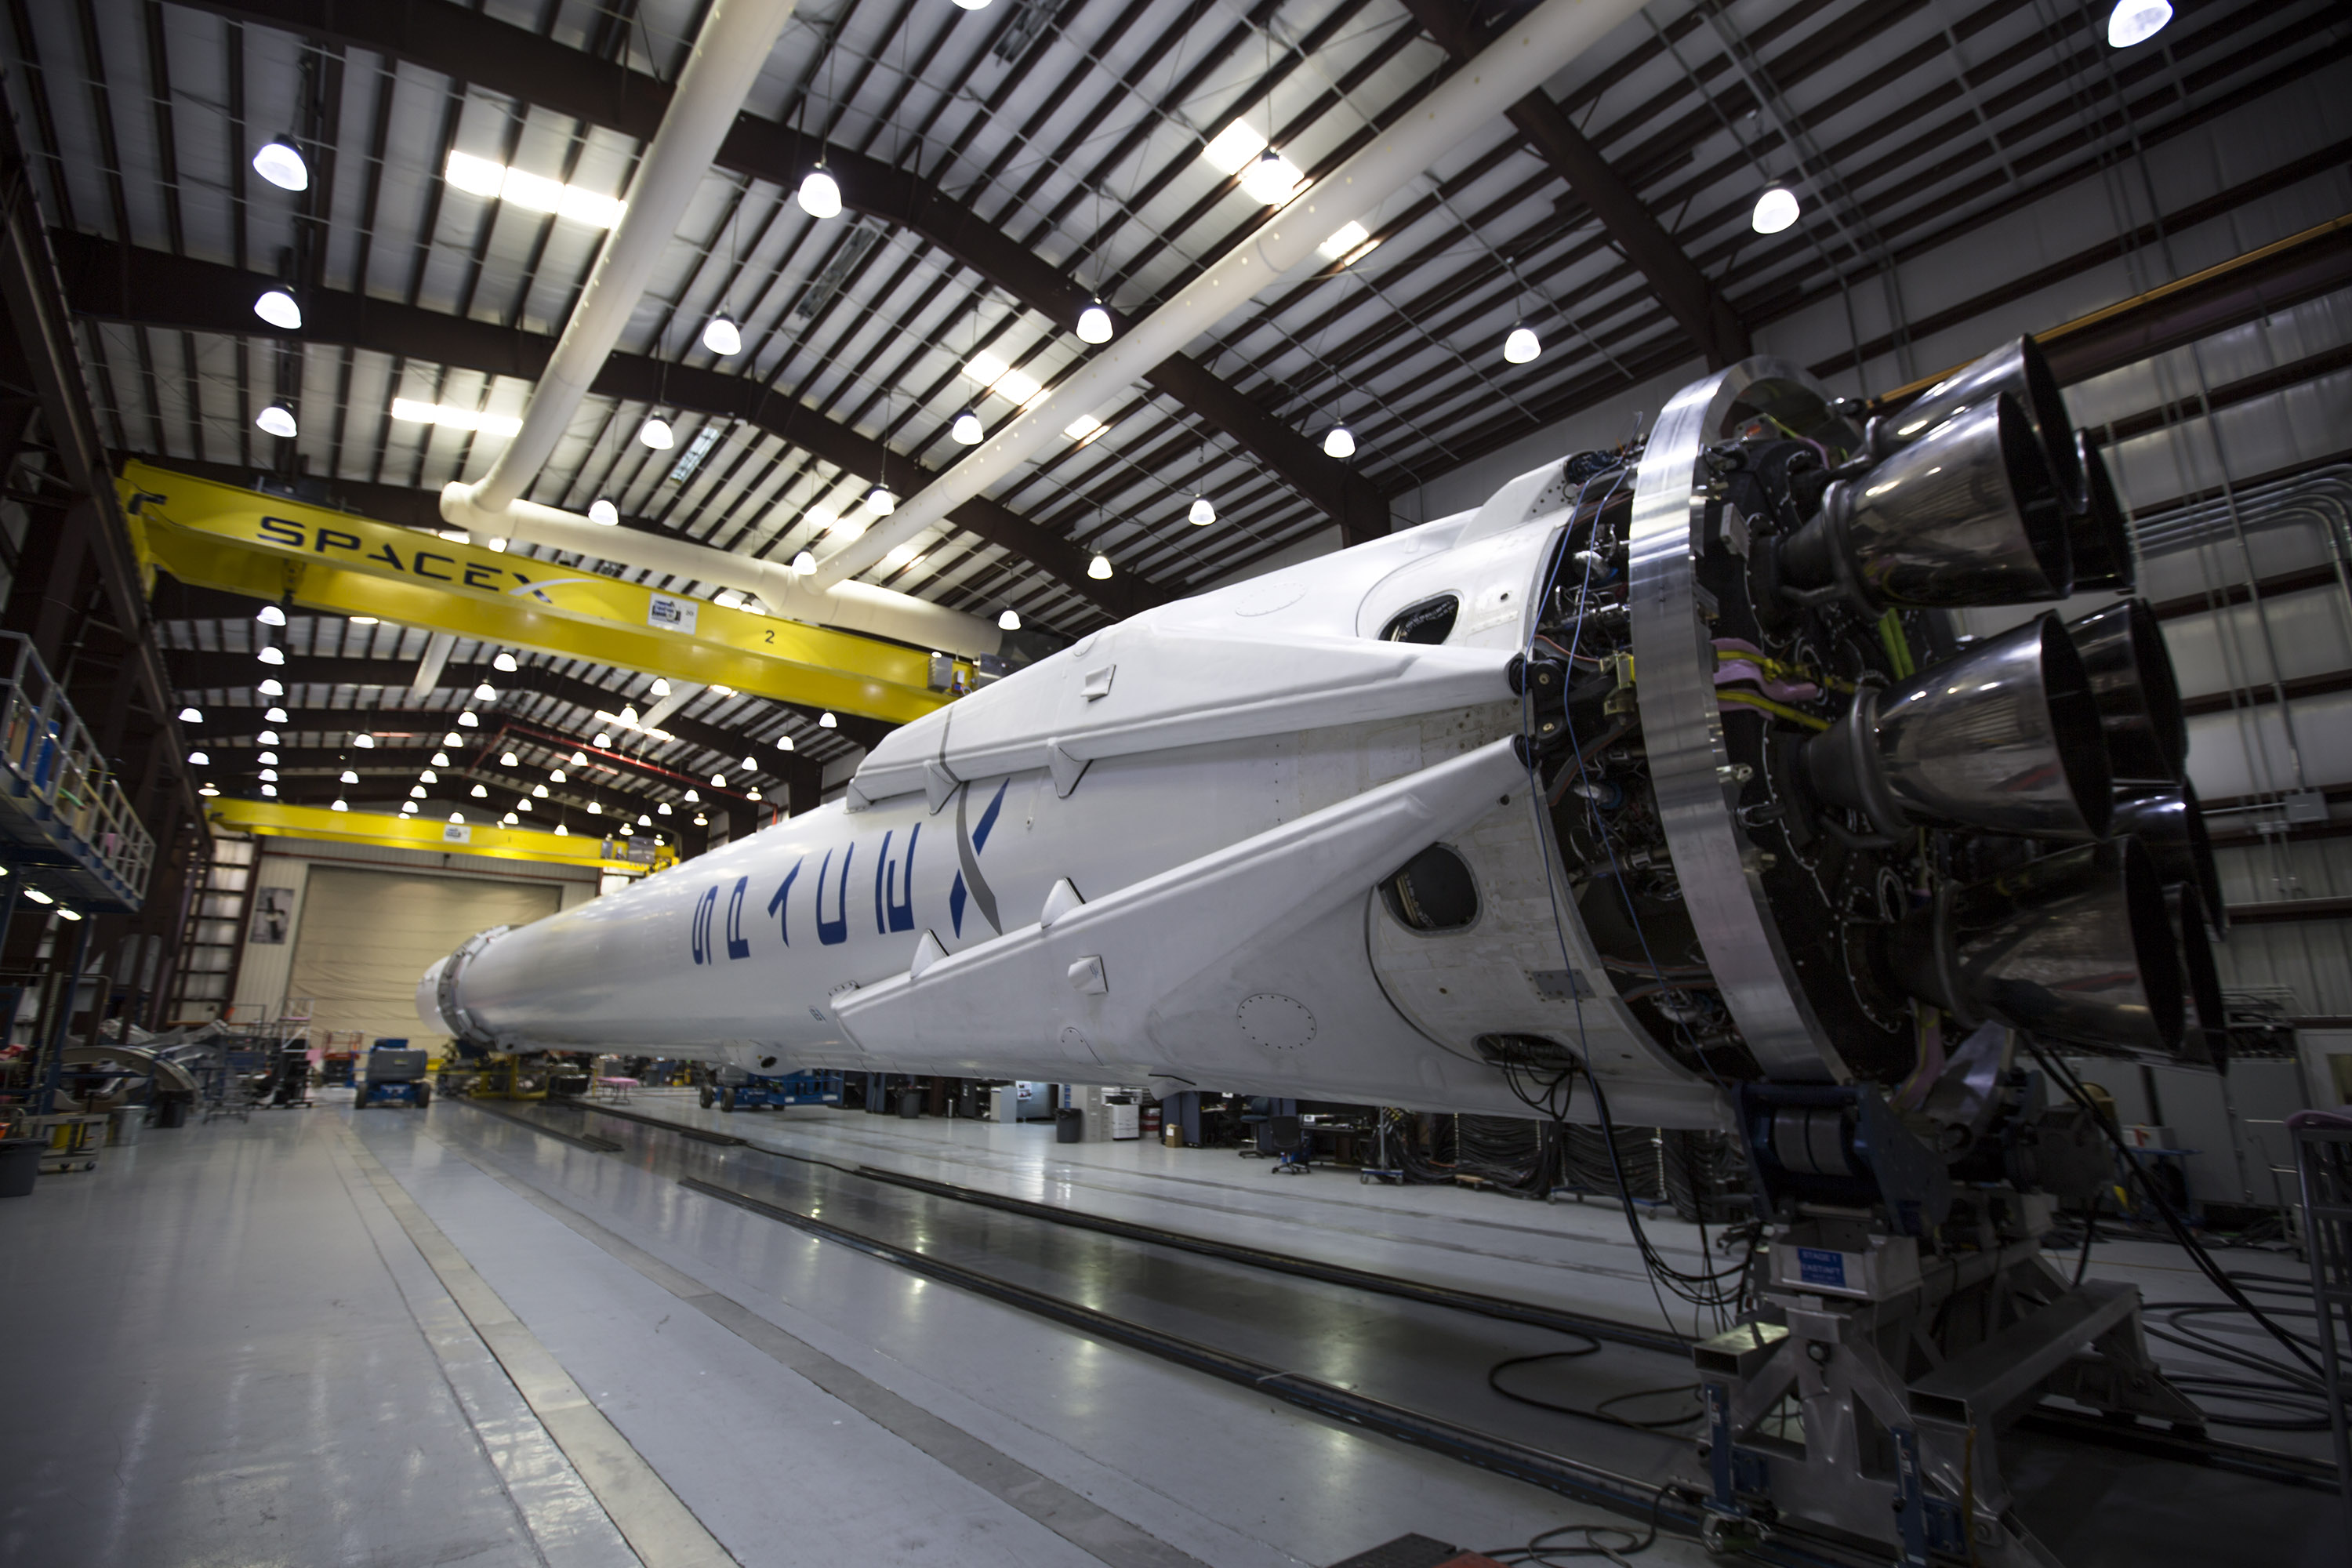 SpaceX wins its first military launch contract